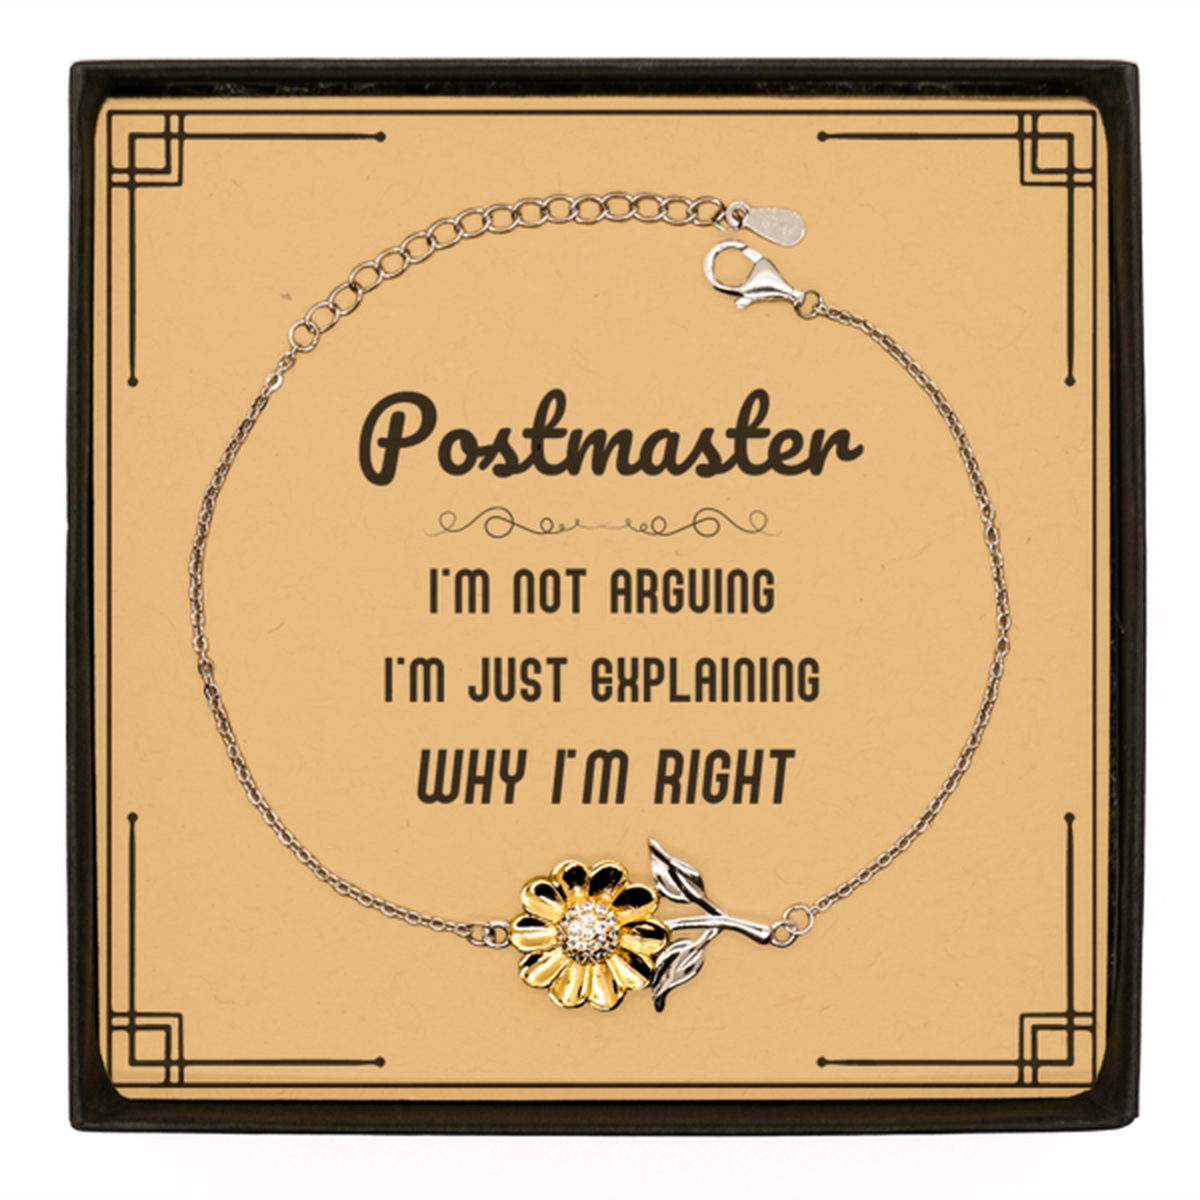 Postmaster I'm not Arguing. I'm Just Explaining Why I'm RIGHT Sunflower Bracelet, Funny Saying Quote Postmaster Gifts For Postmaster Message Card Graduation Birthday Christmas Gifts for Men Women Coworker